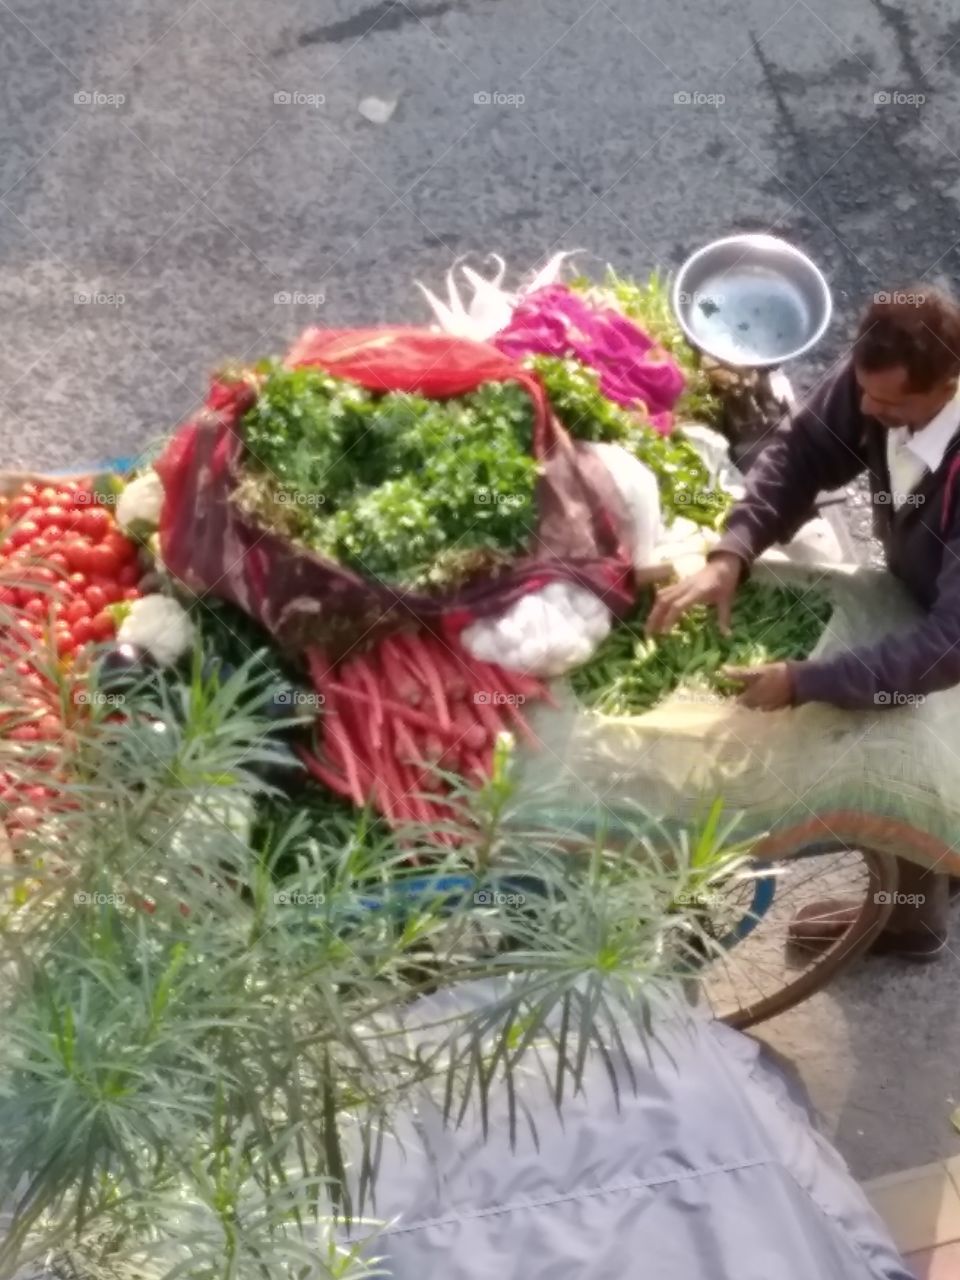 A GREEN GROCER ..selling his vegitable